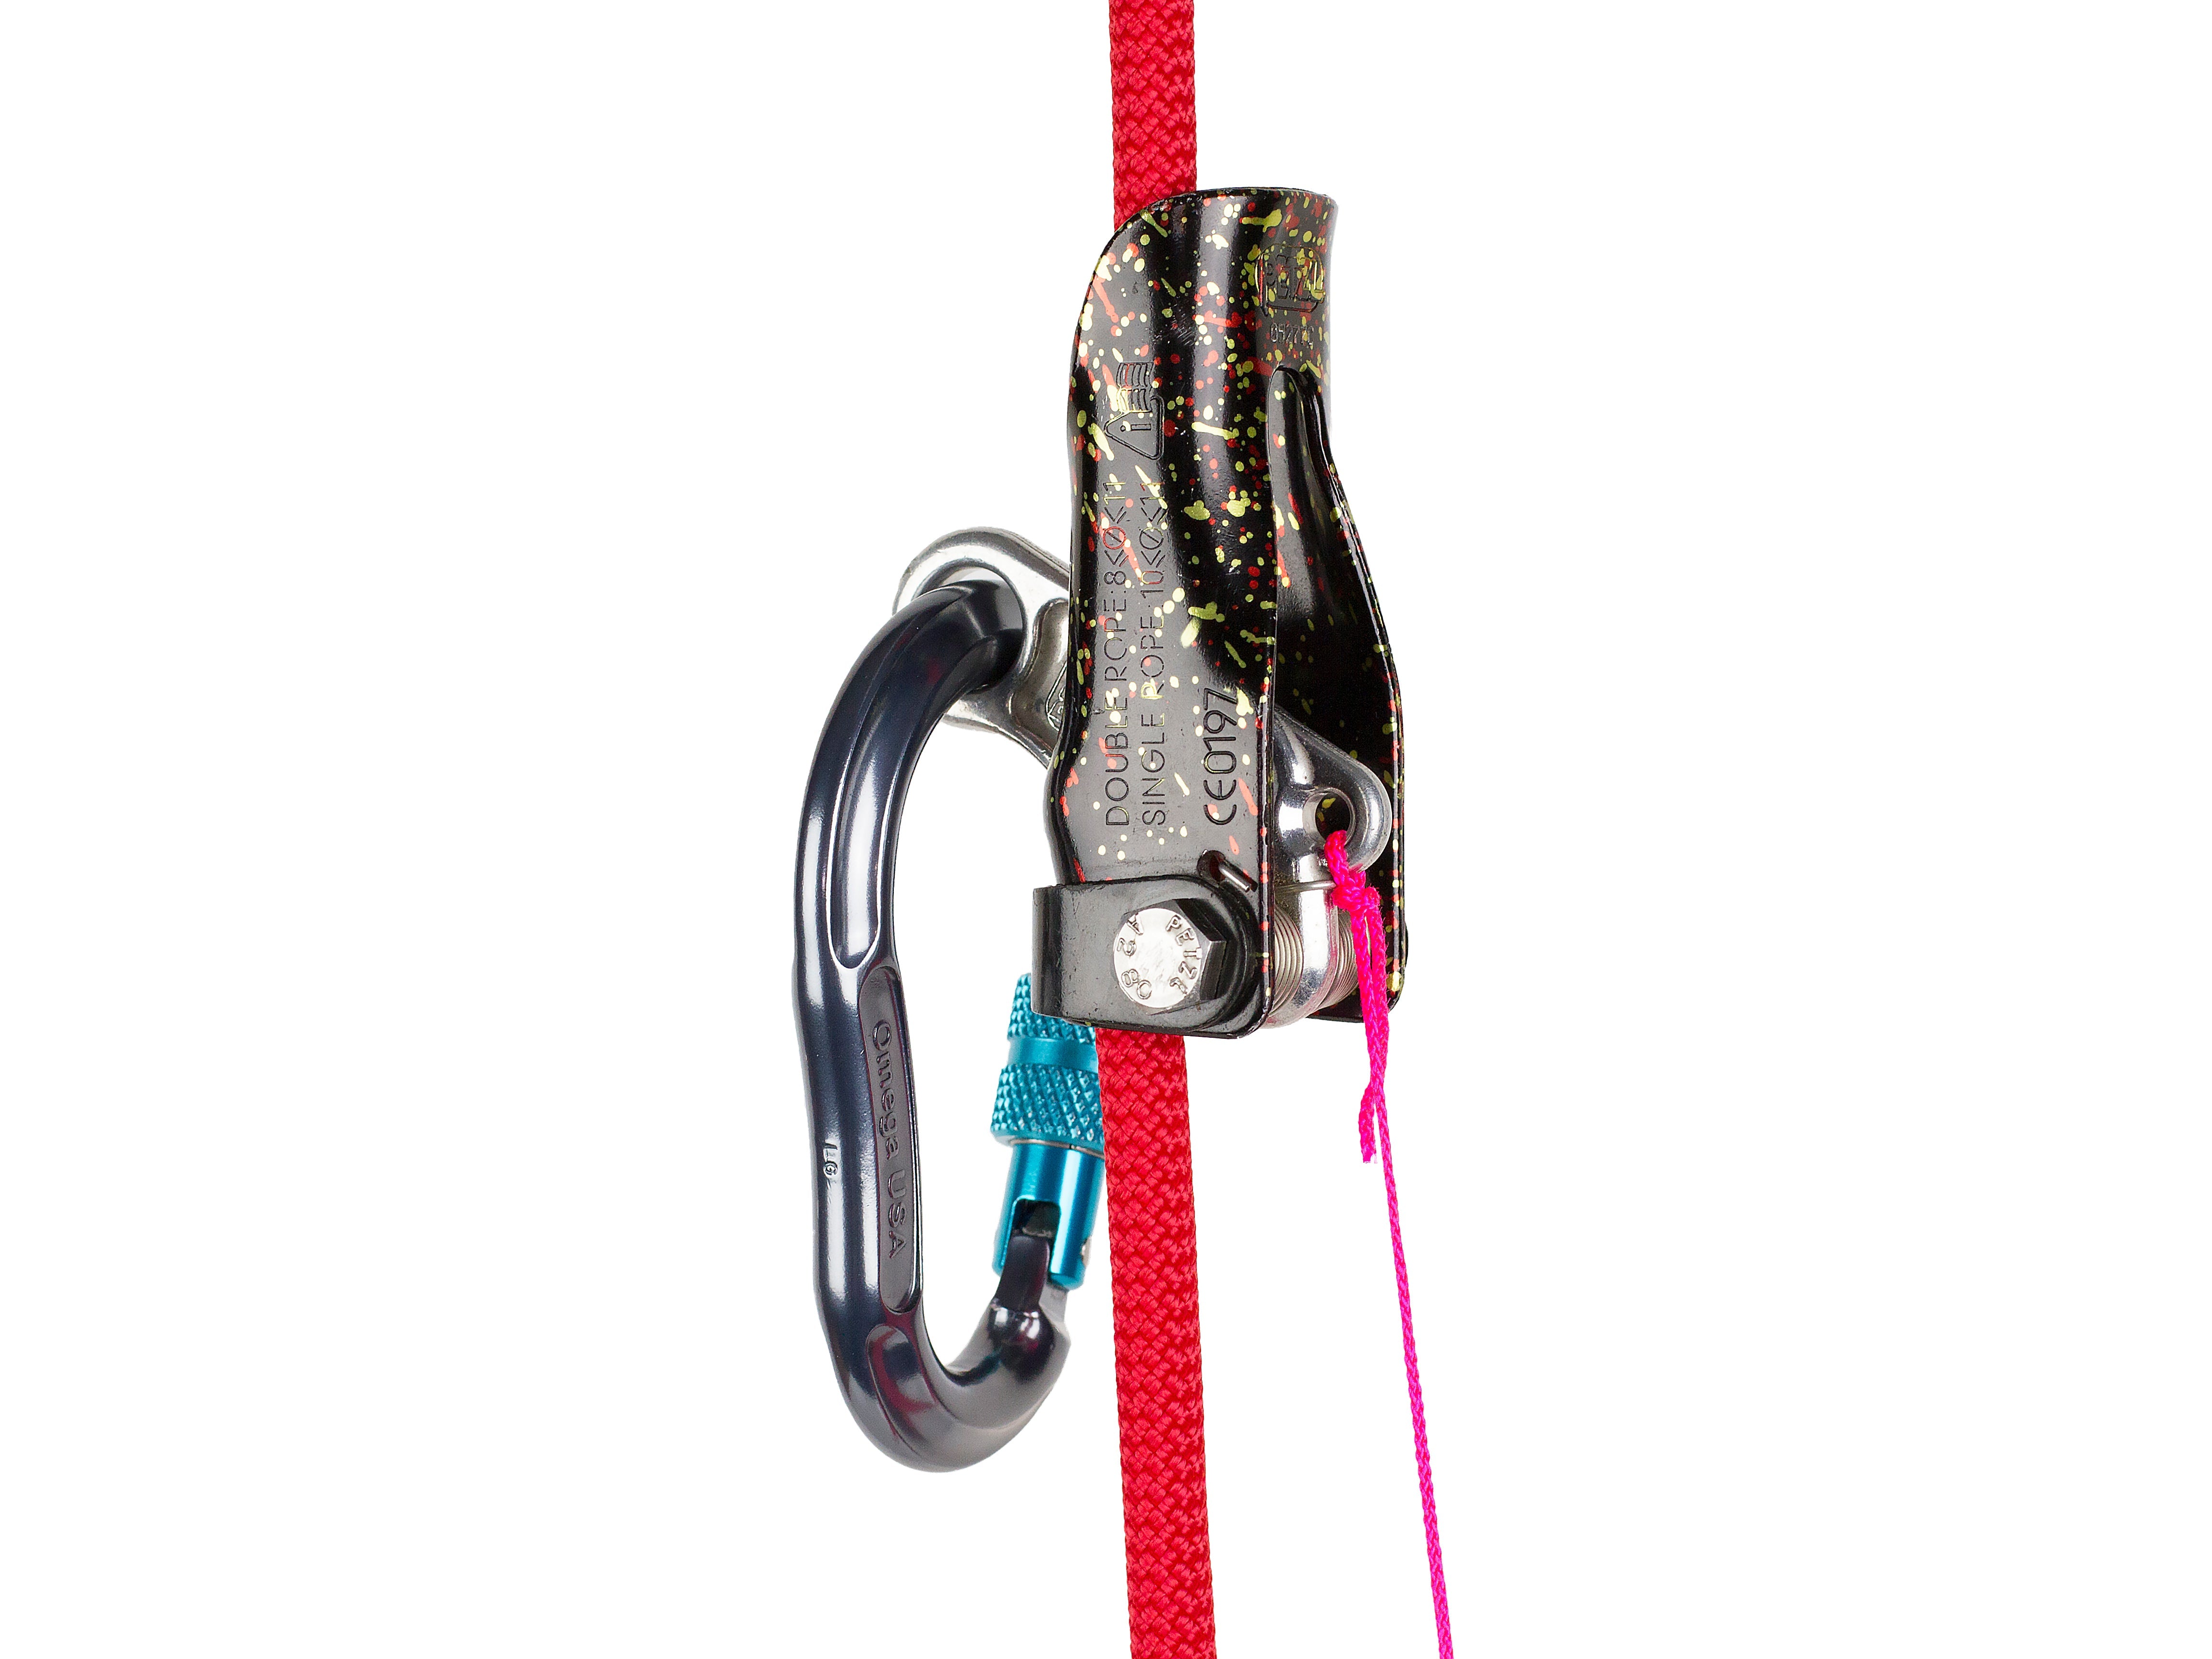 Fall Protection gear for your zip line 